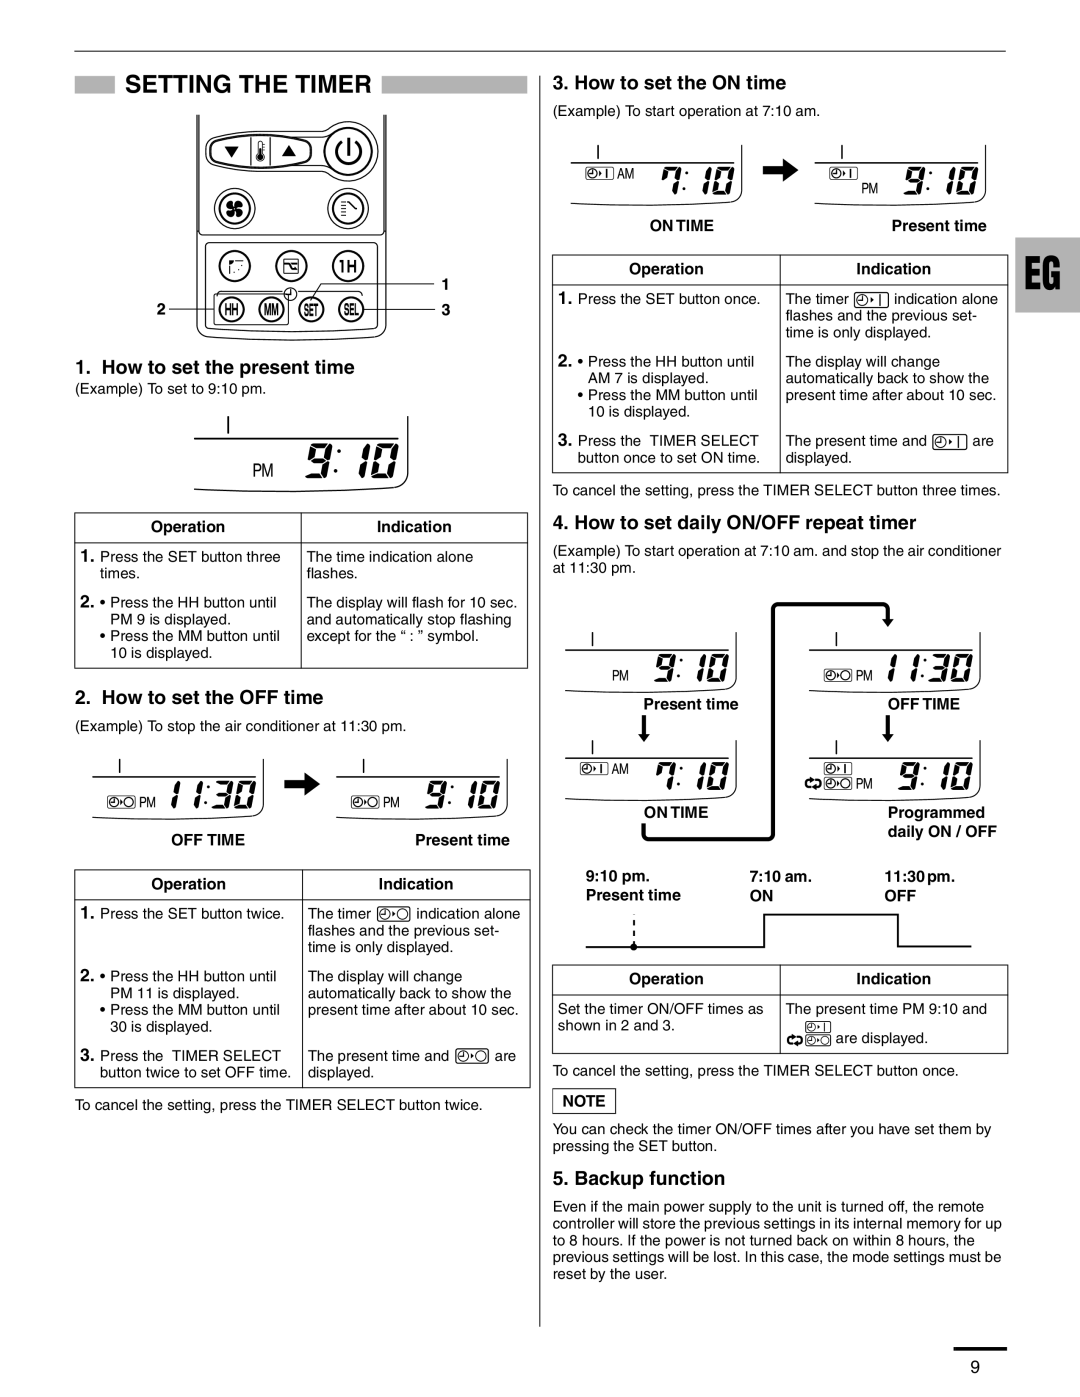 Panasonic R410A service manual Backup function, Setting The Timer, How to set the present time, How to set the OFF time 